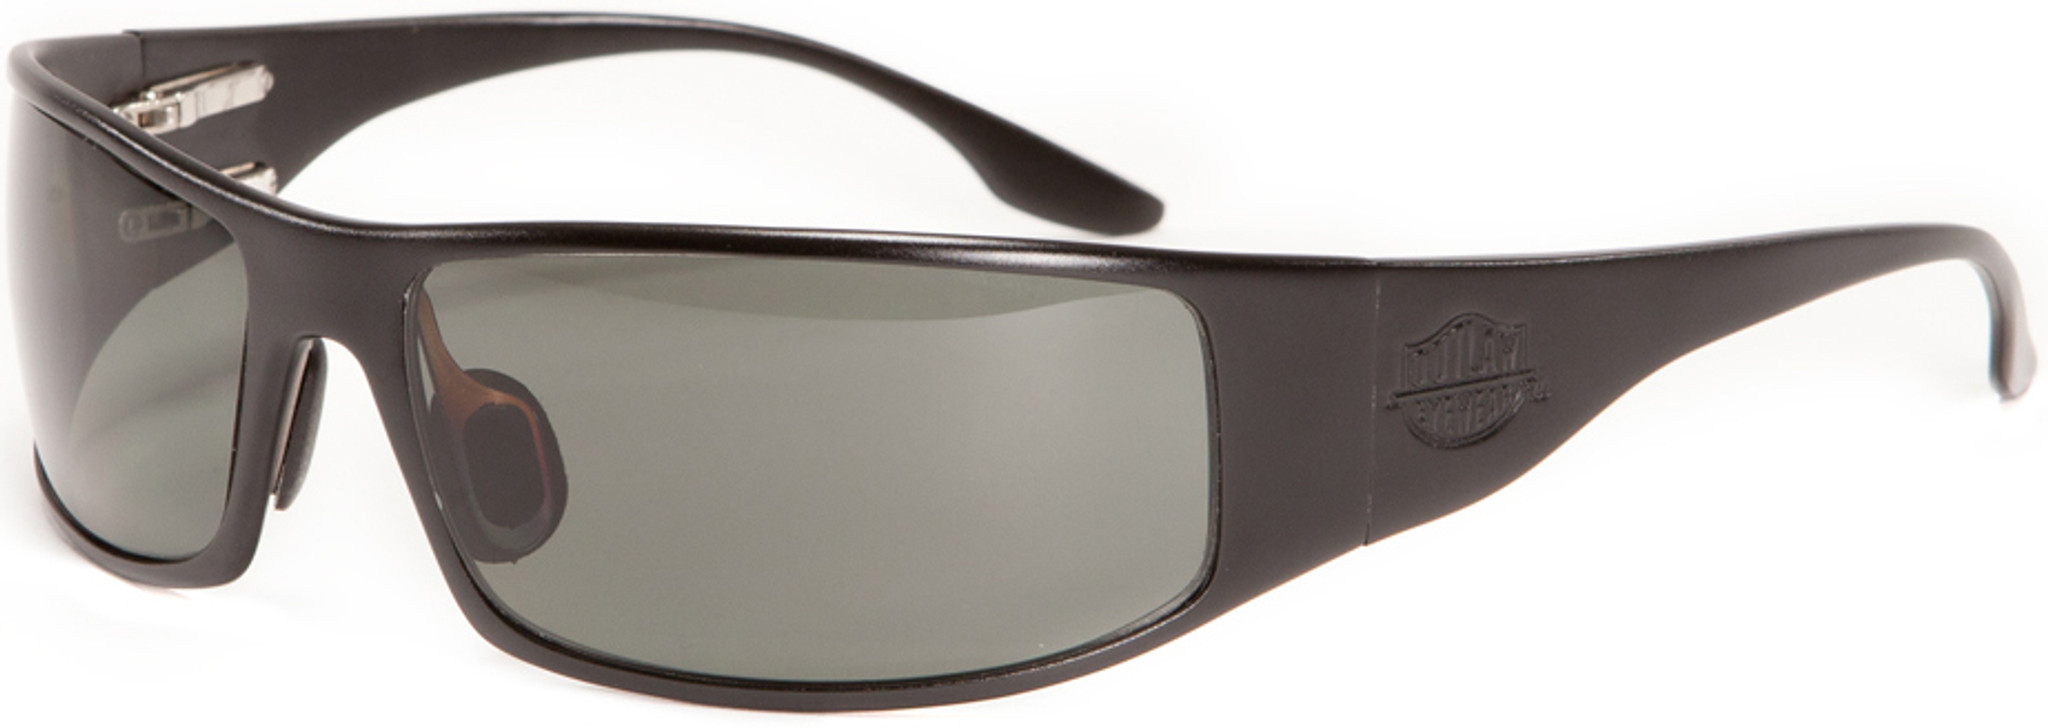 OutLaw Eyewear Fugitive TAC Military Combat and Motorcycle Aluminum Sunglass-  Black frame with Gray Polarized lenses - MetalSunglasses